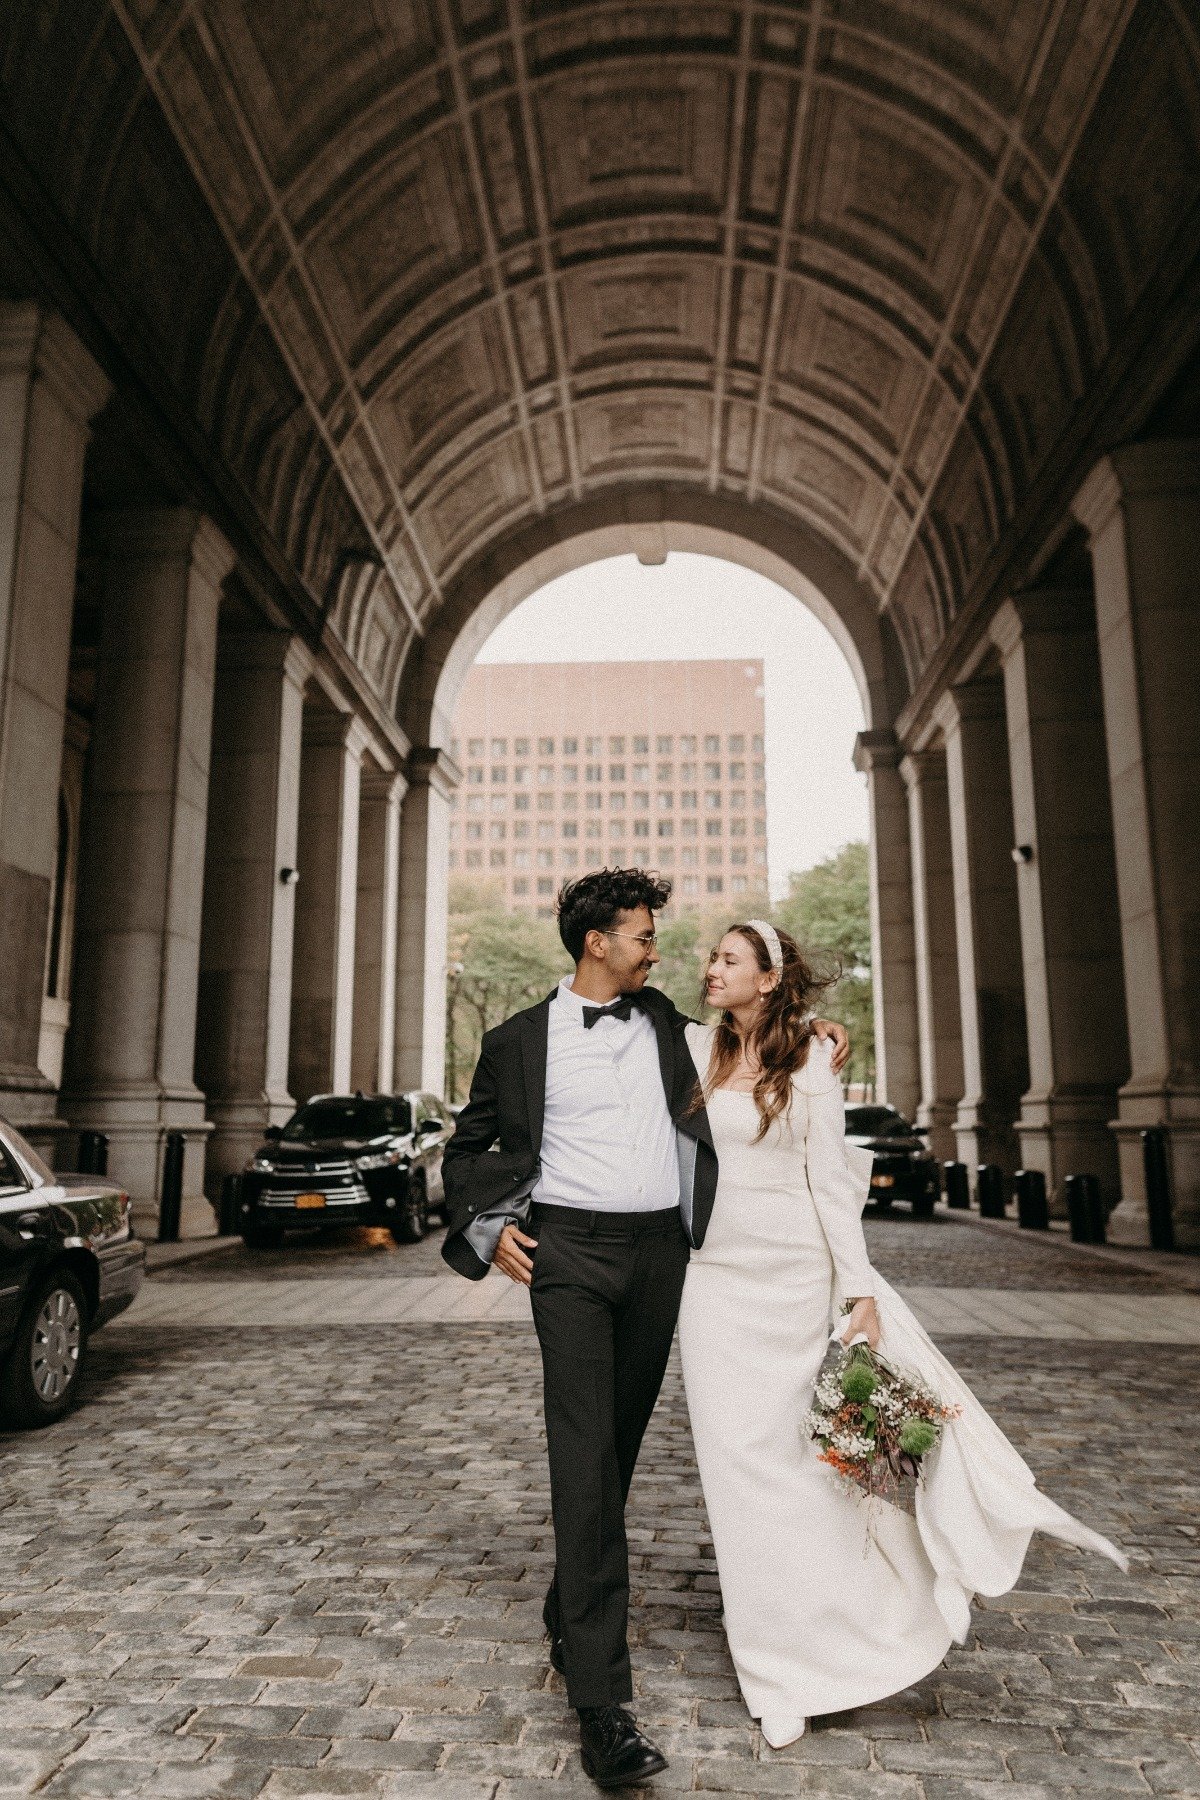 From subway to Soho: A “90’s chic” elopement all over Manhattan